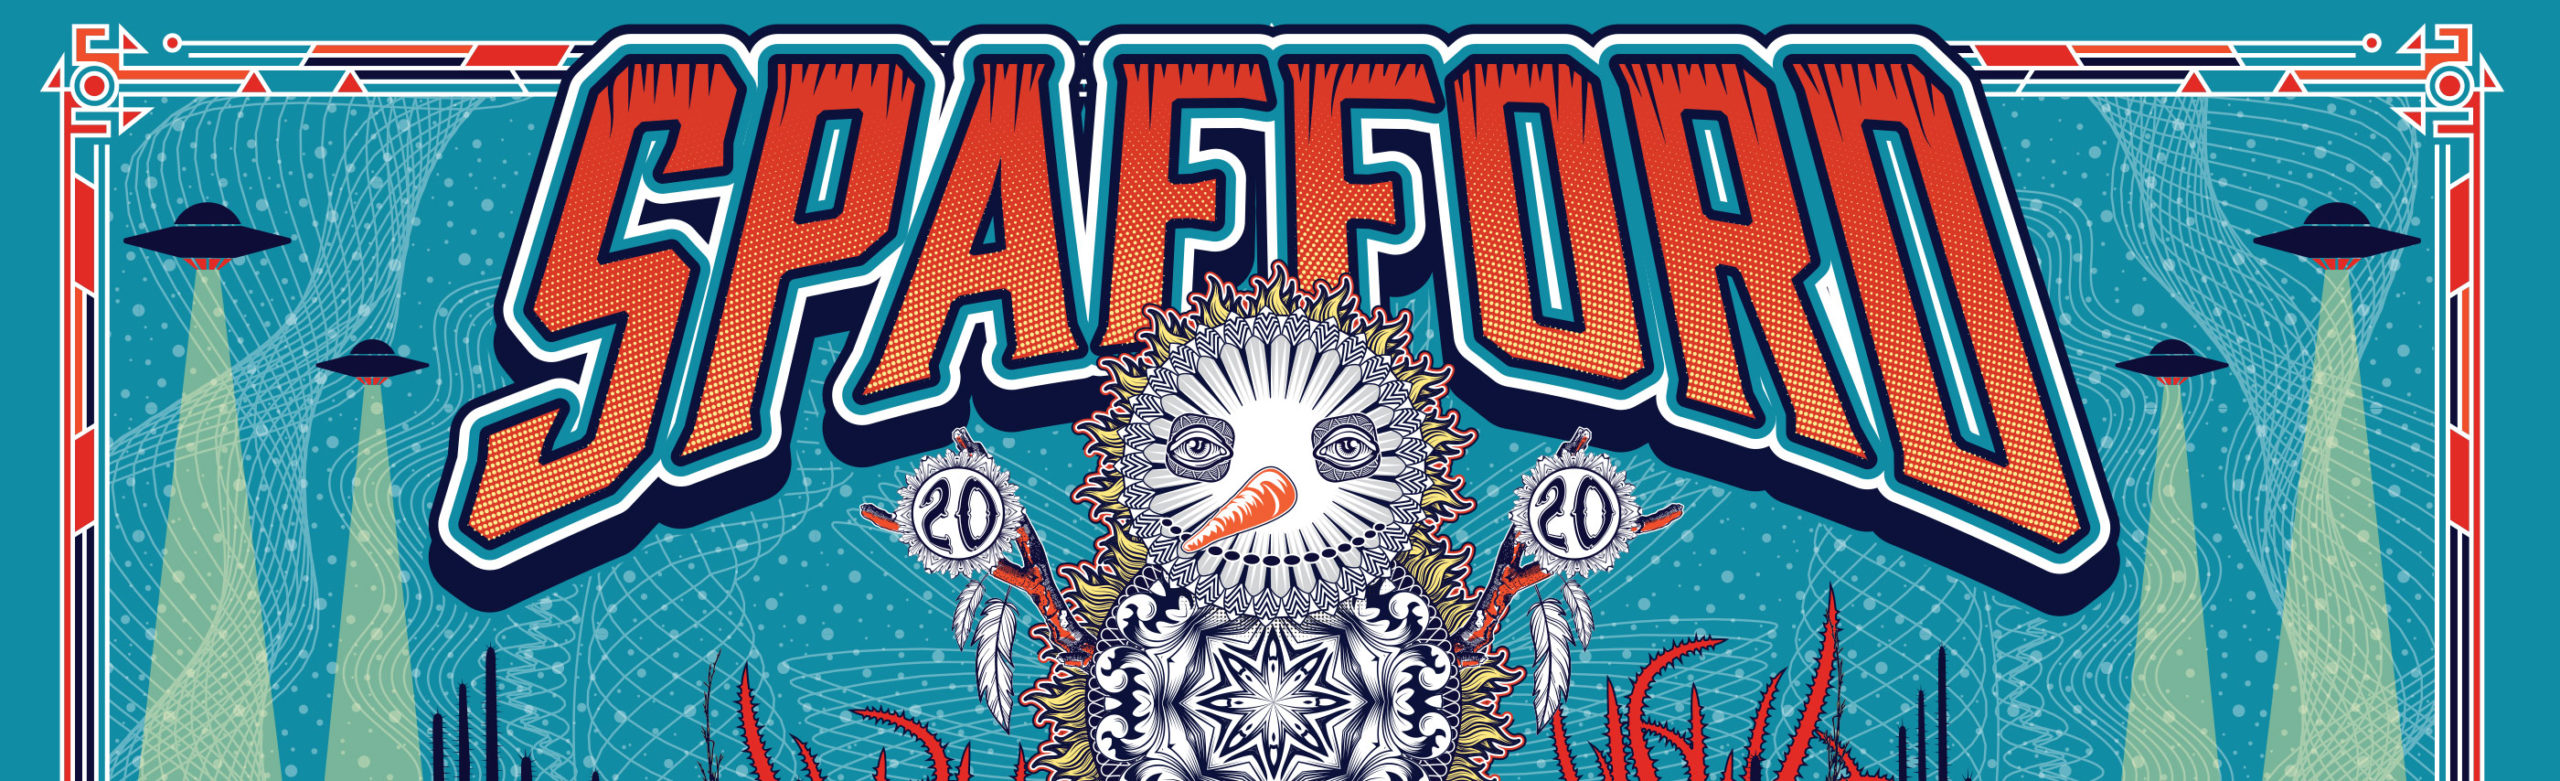 Spafford Tickets, T-Shirt & Poster Giveaway Image